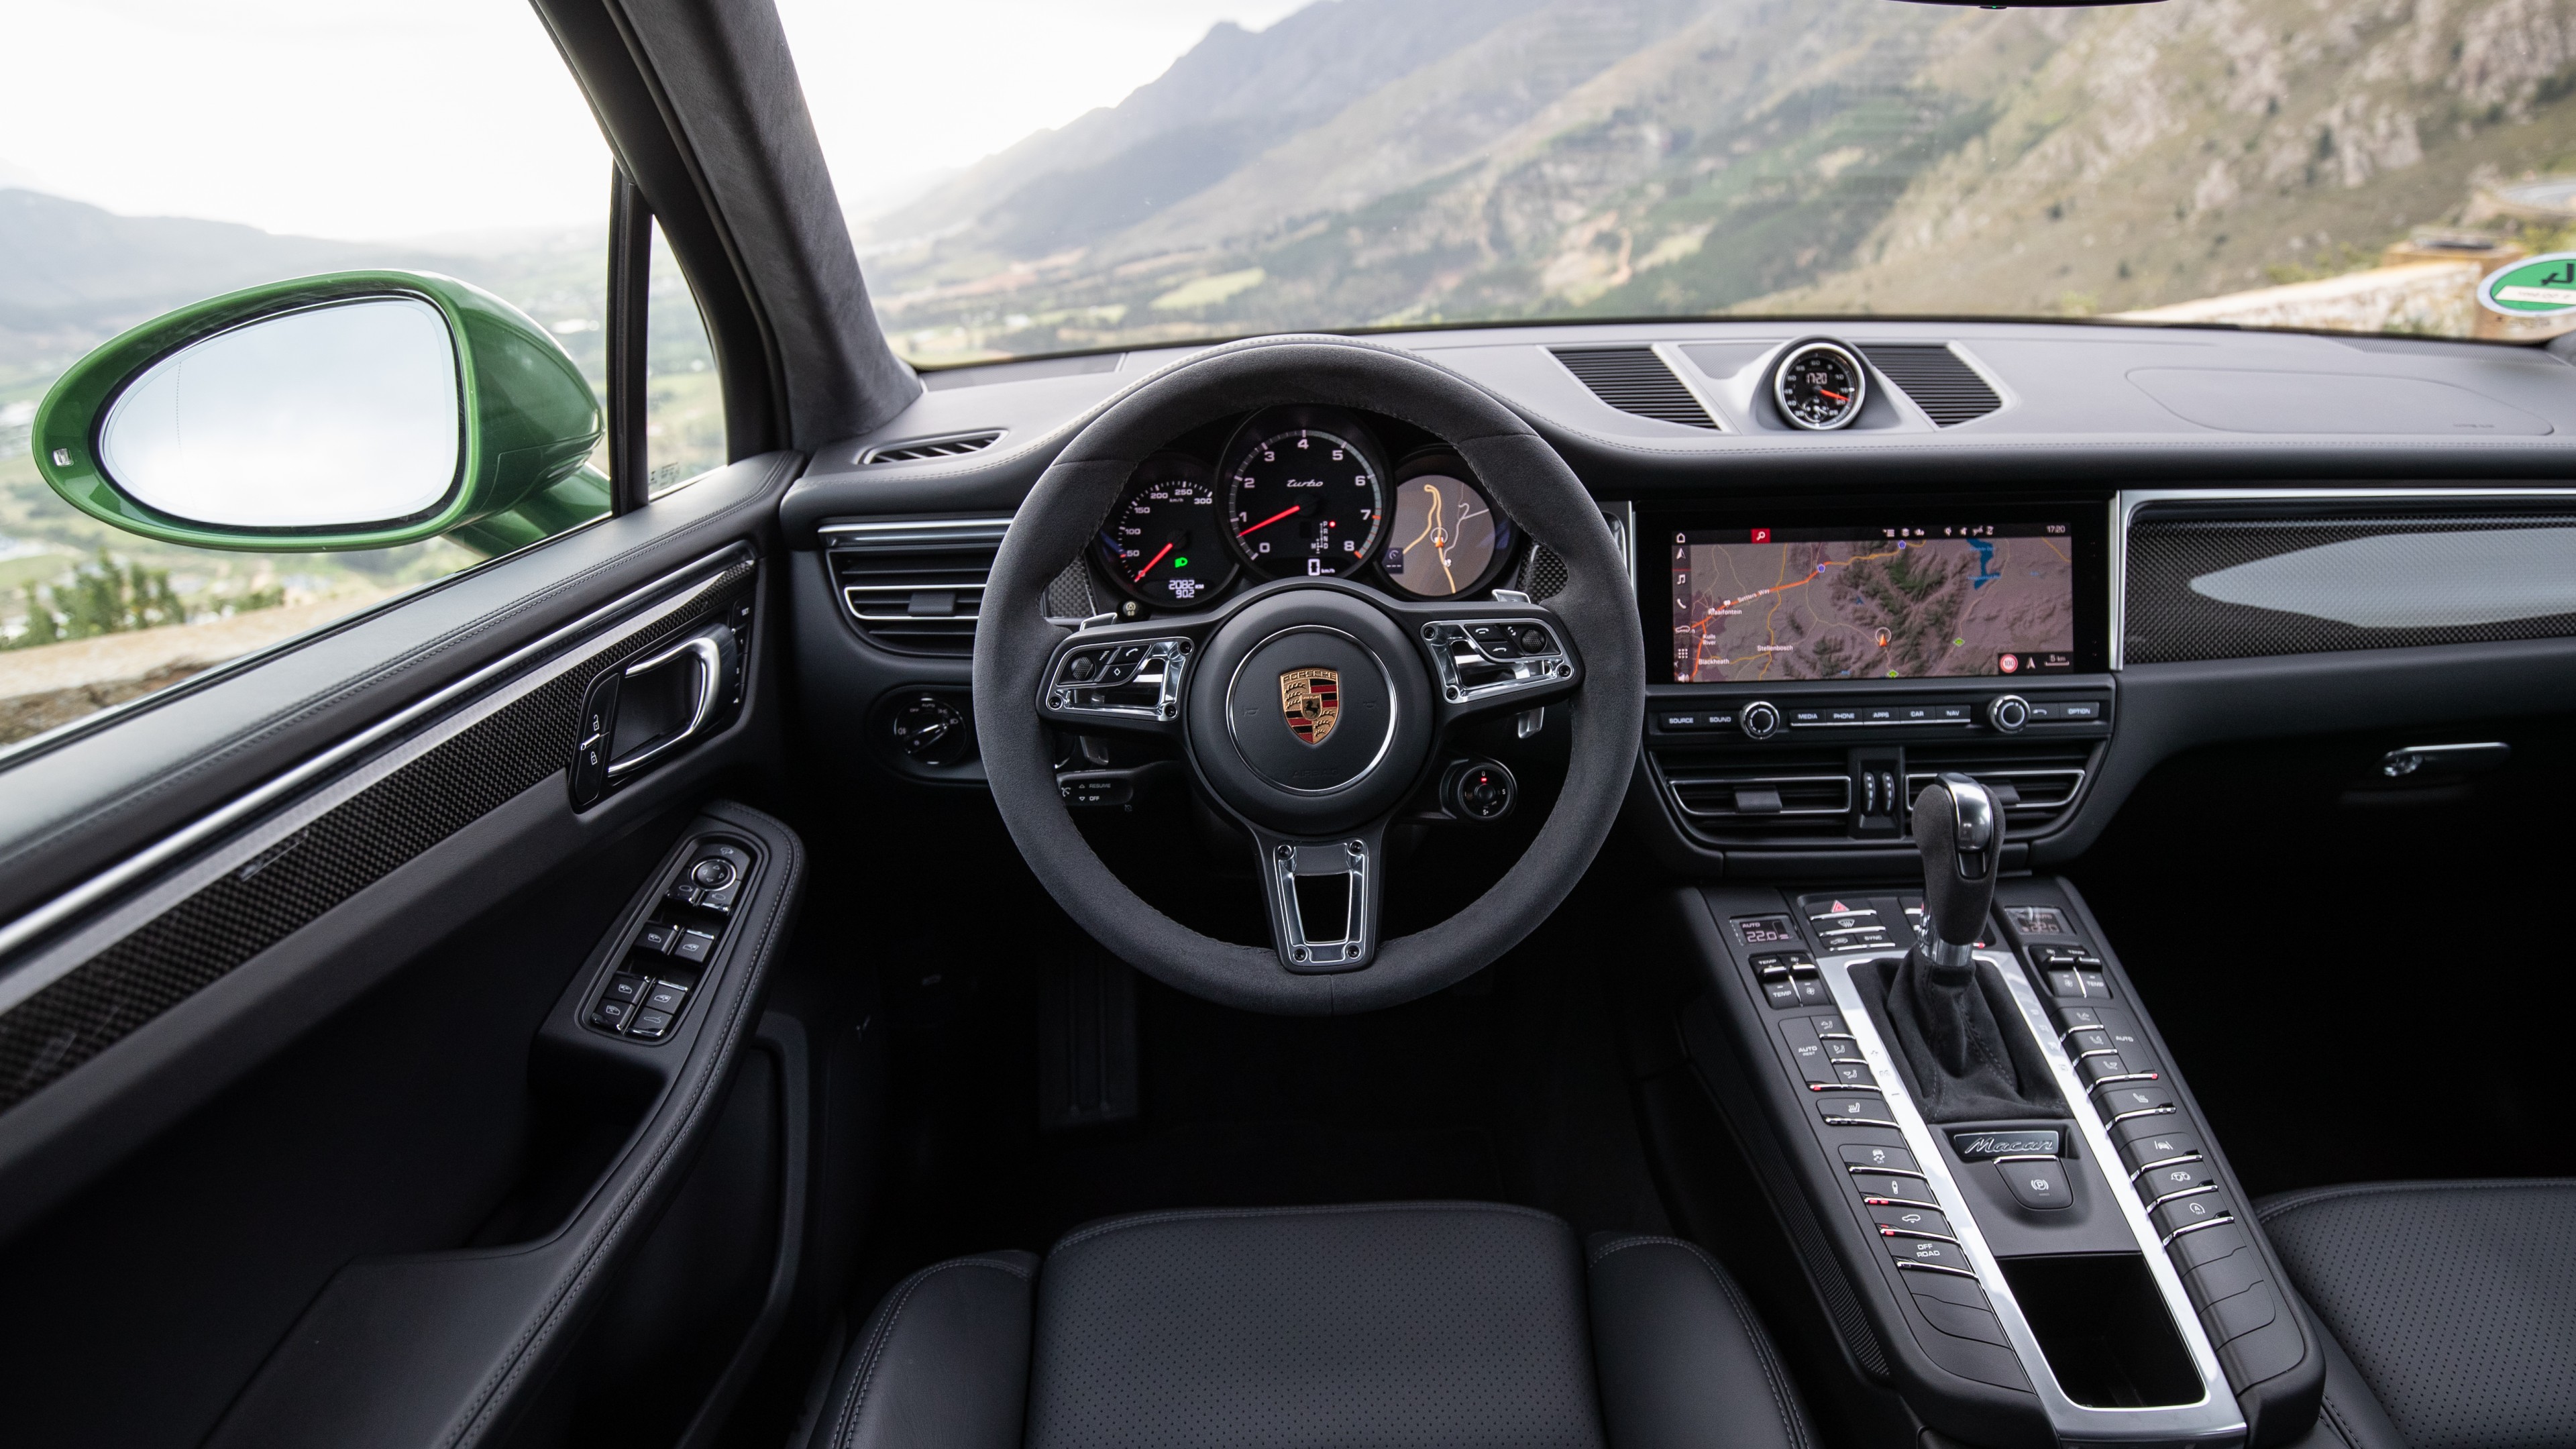 The seats are roomy and accommodating, and there are plenty of tech and comfort features, albeit a few that require some learning. Wallpaper Porsche Macan Turbo, interior, 2020 cars, SUV